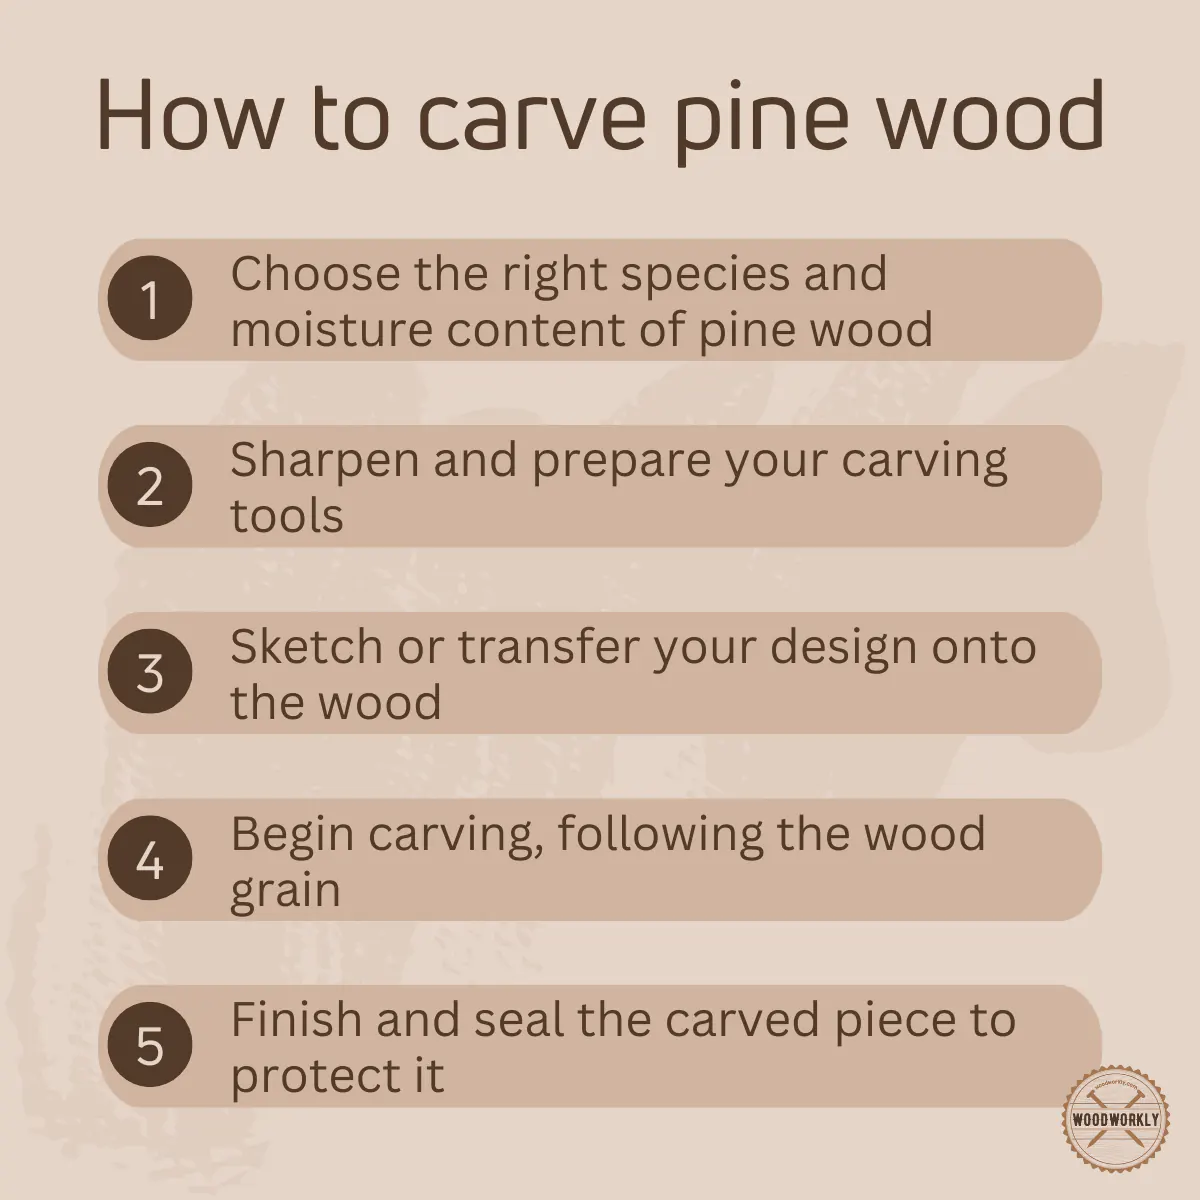 How to carve pine wood